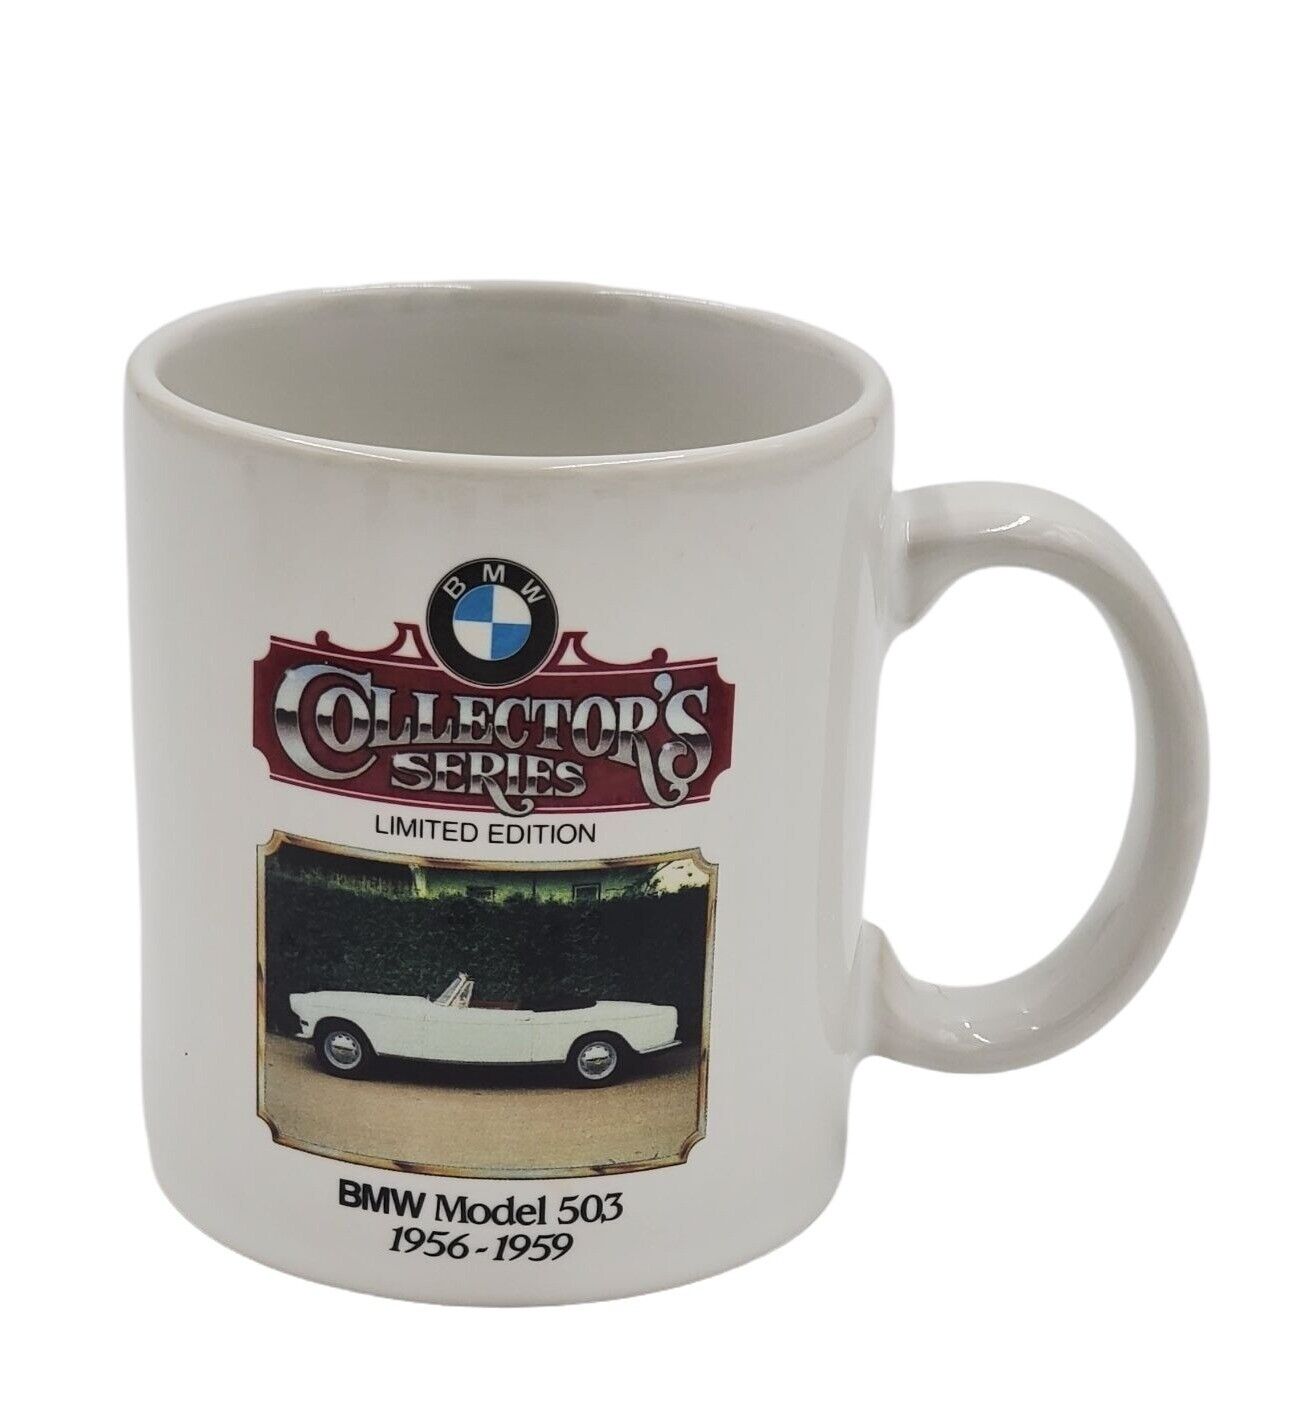 BMW Collector's Series Coffee Cup Model 503 1956-1959 LE 869 of 3000